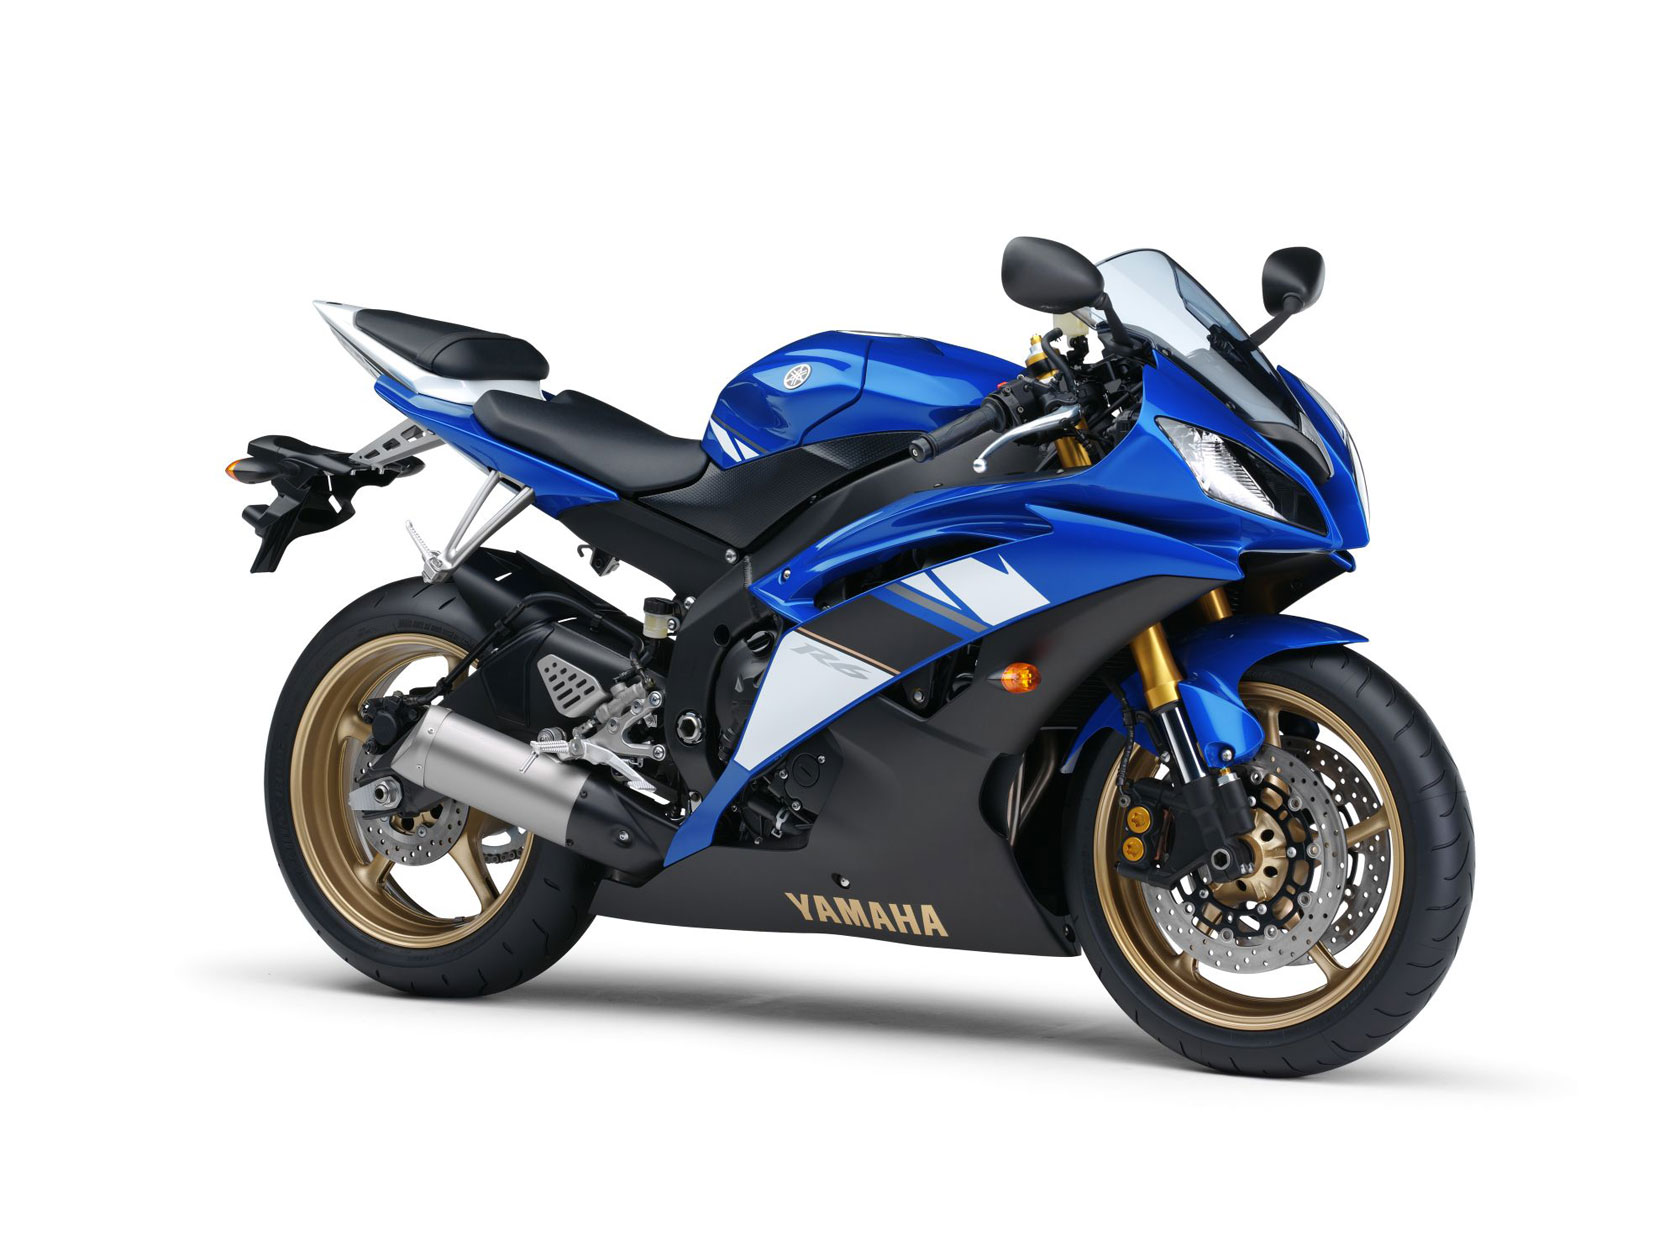 YAMAHA R6 20062007 Review  Speed Specs  Prices  MCN